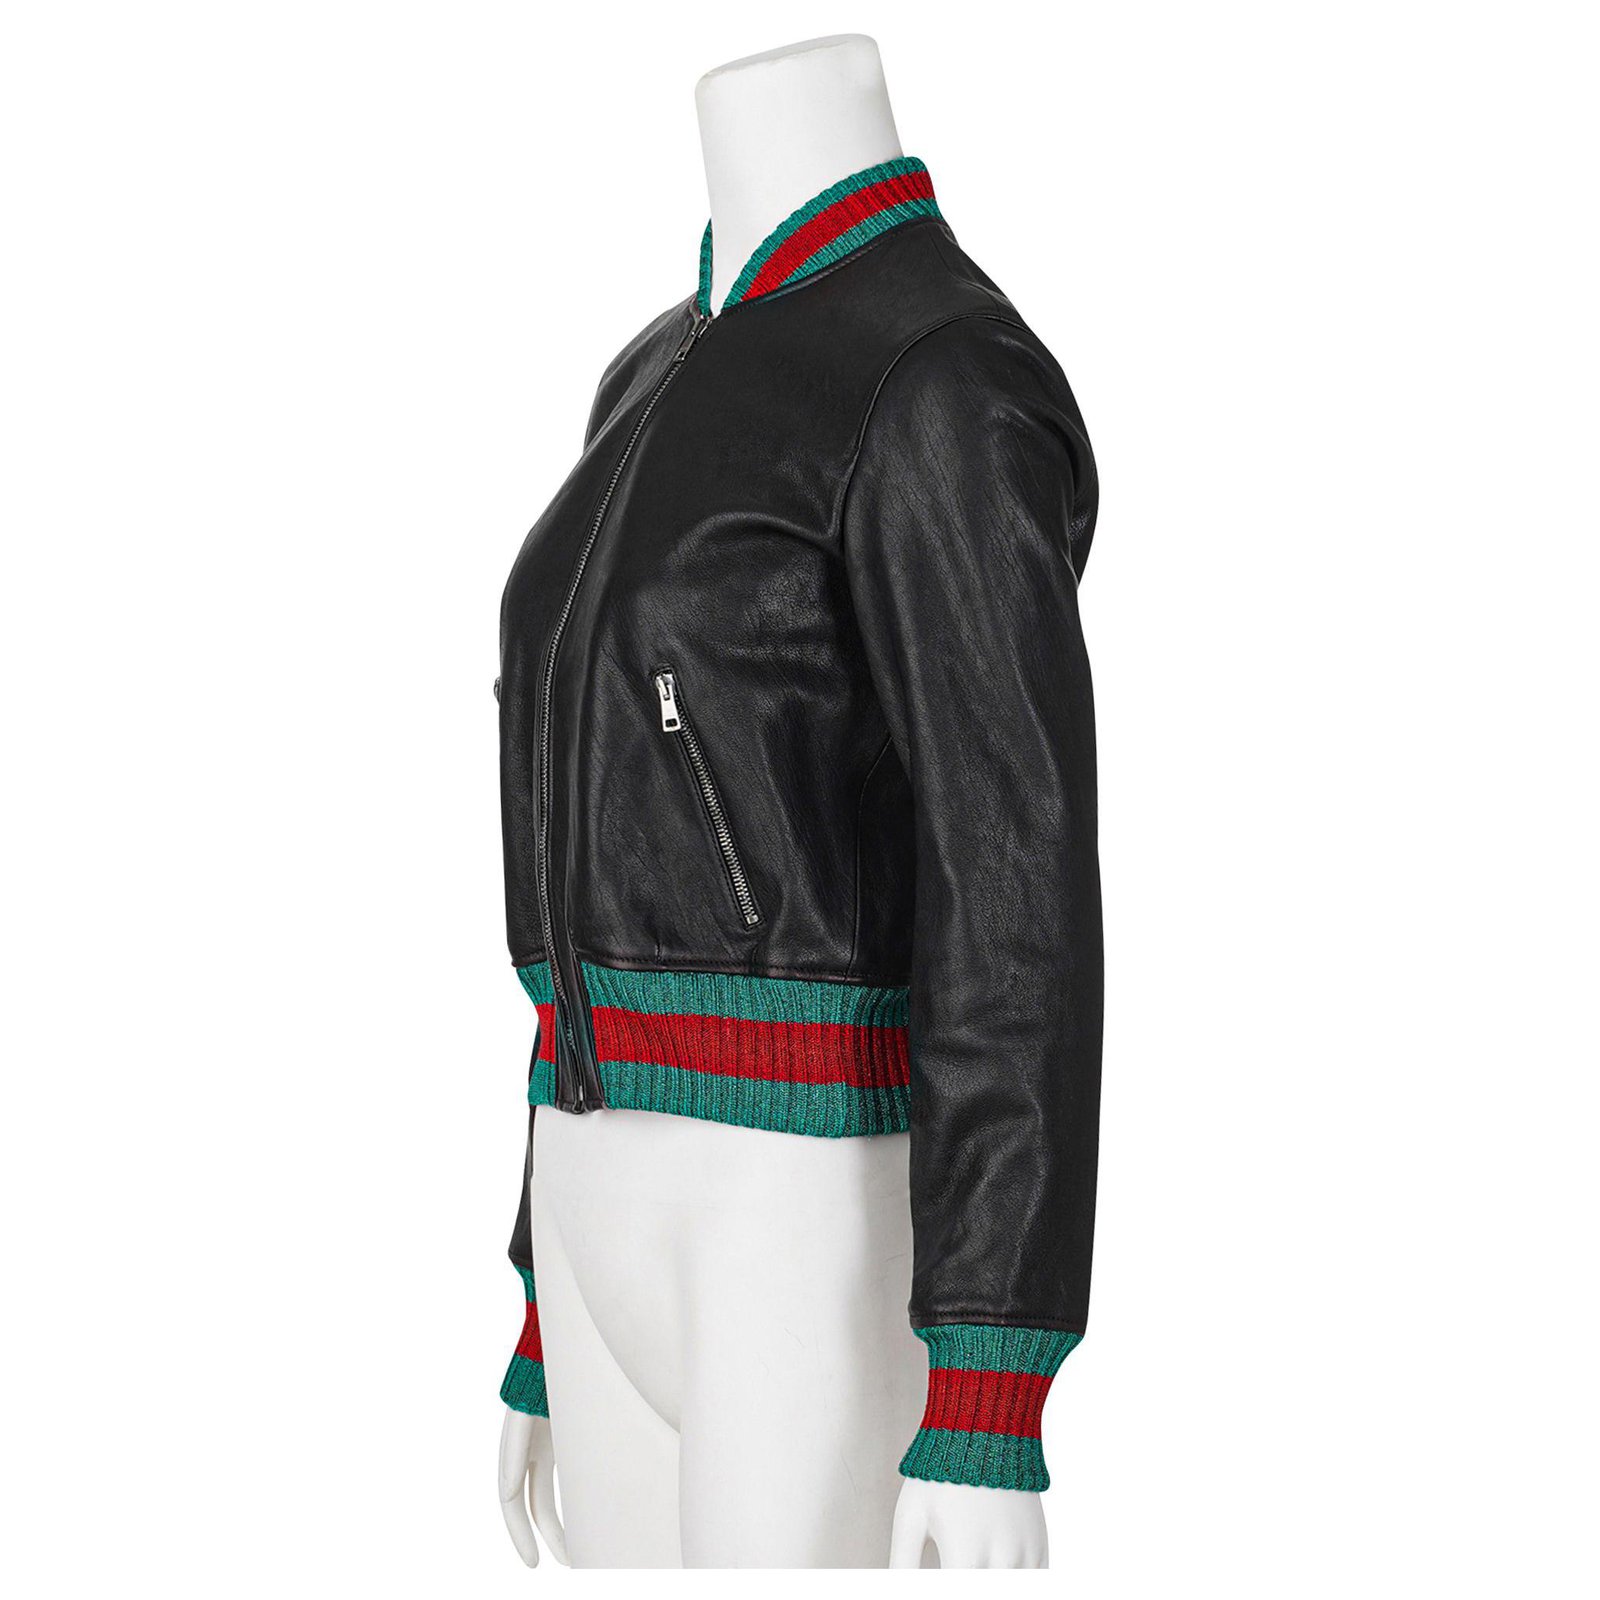 Gucci 2019 Womens Tiger Leather Jacket. 38/2/S. $6800